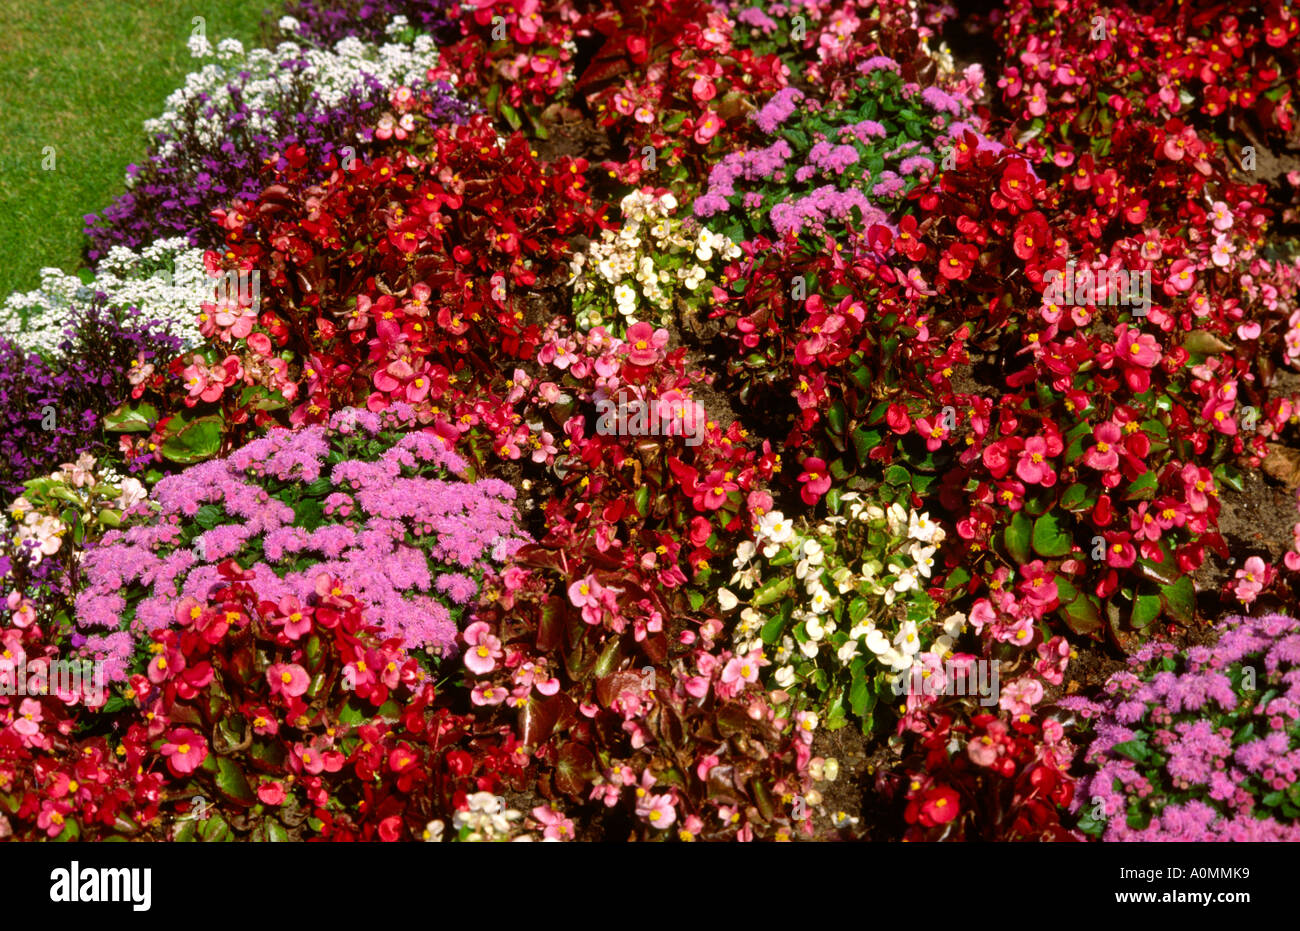 Cheshire Crewe floral display Stock Photo